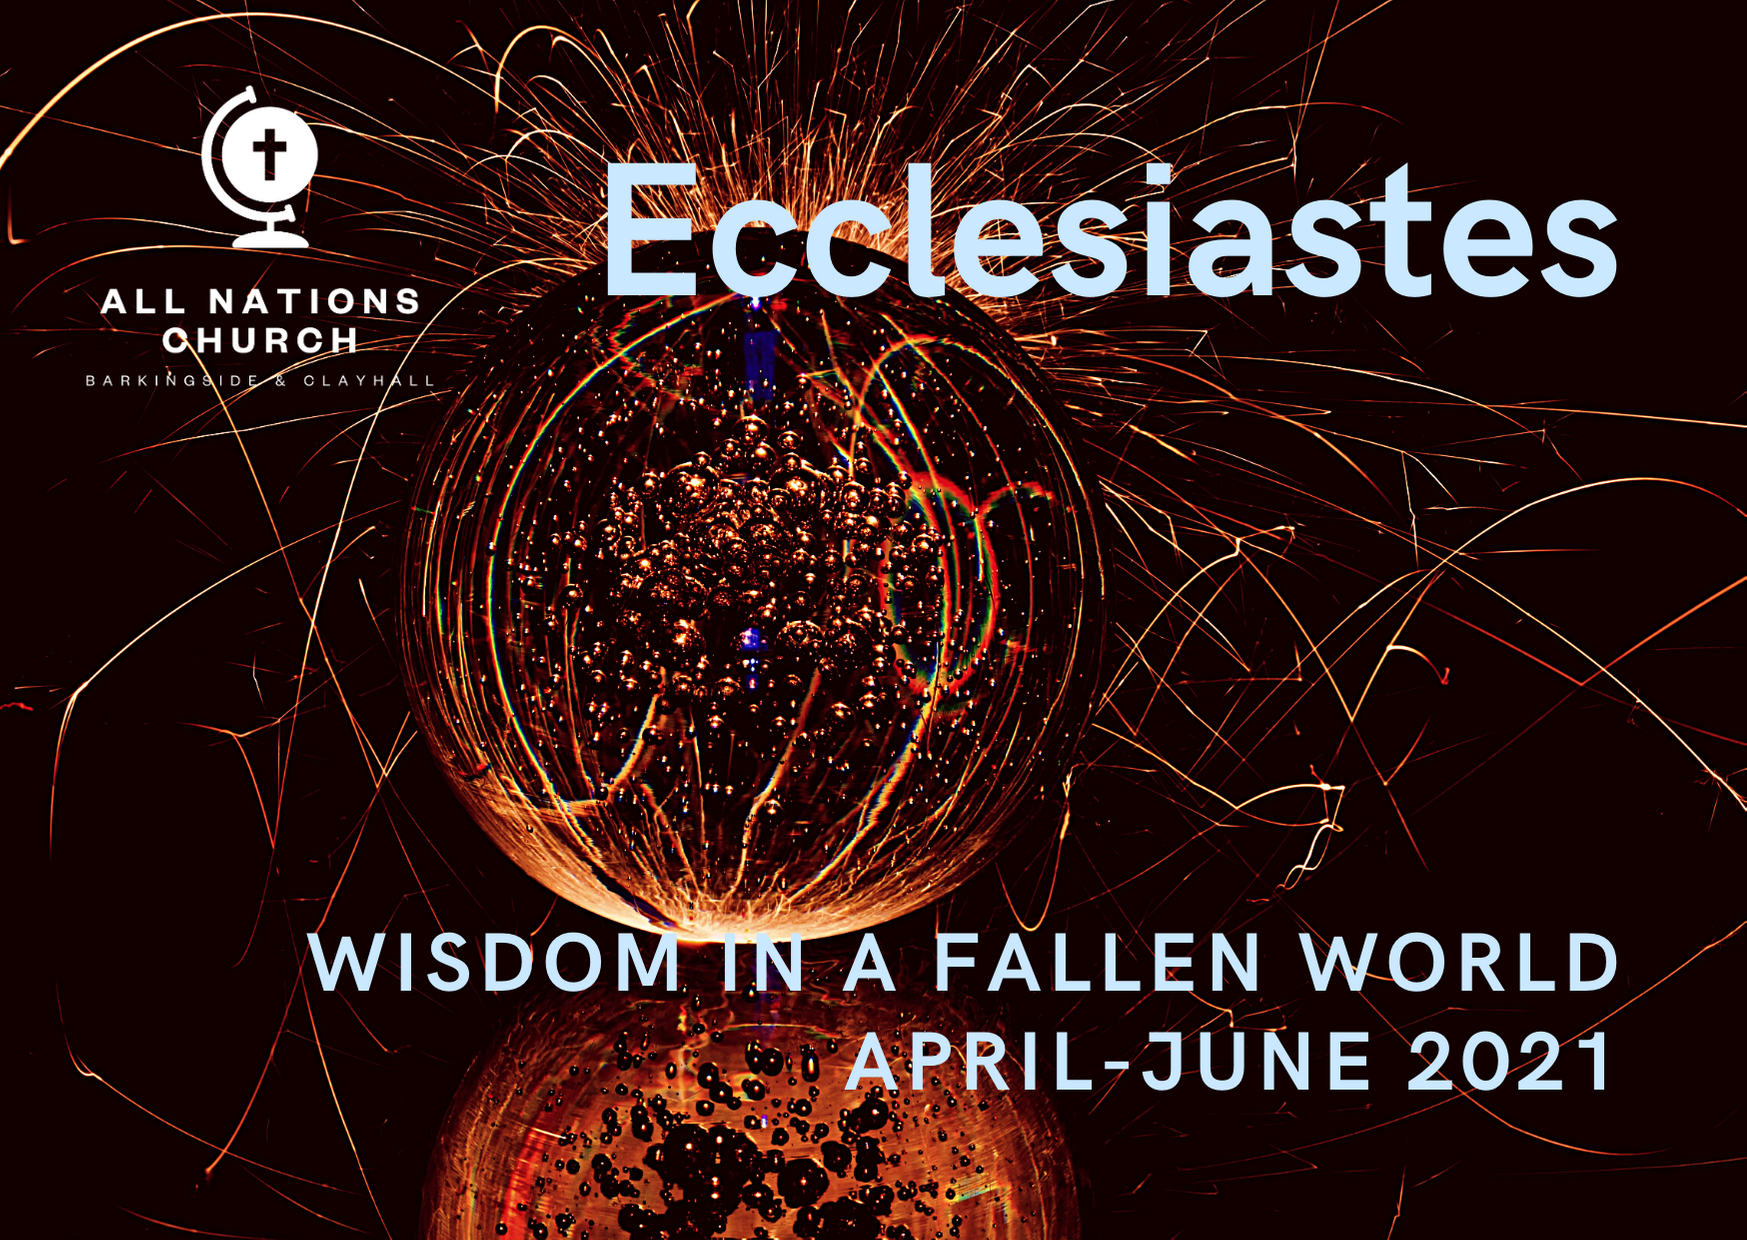 Ecclesiastes 1 & 12 (Meaning of Life)